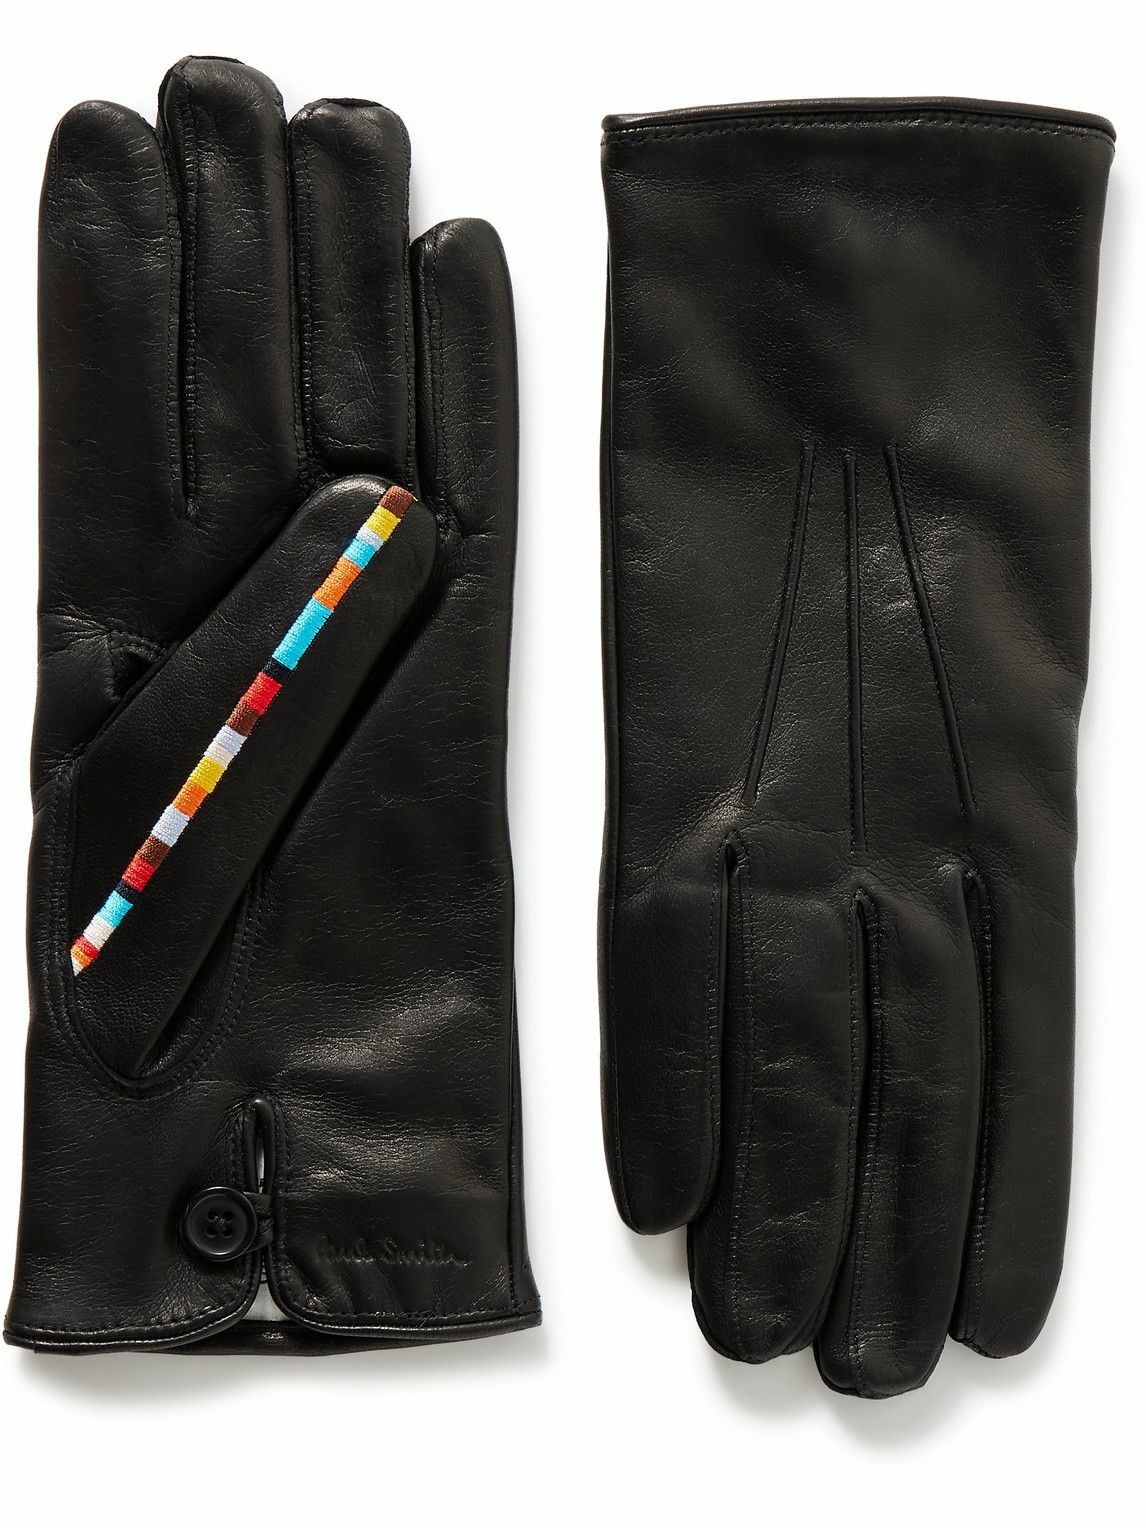 Paul Smith - Embroidered Leather Gloves - Black Paul Smith